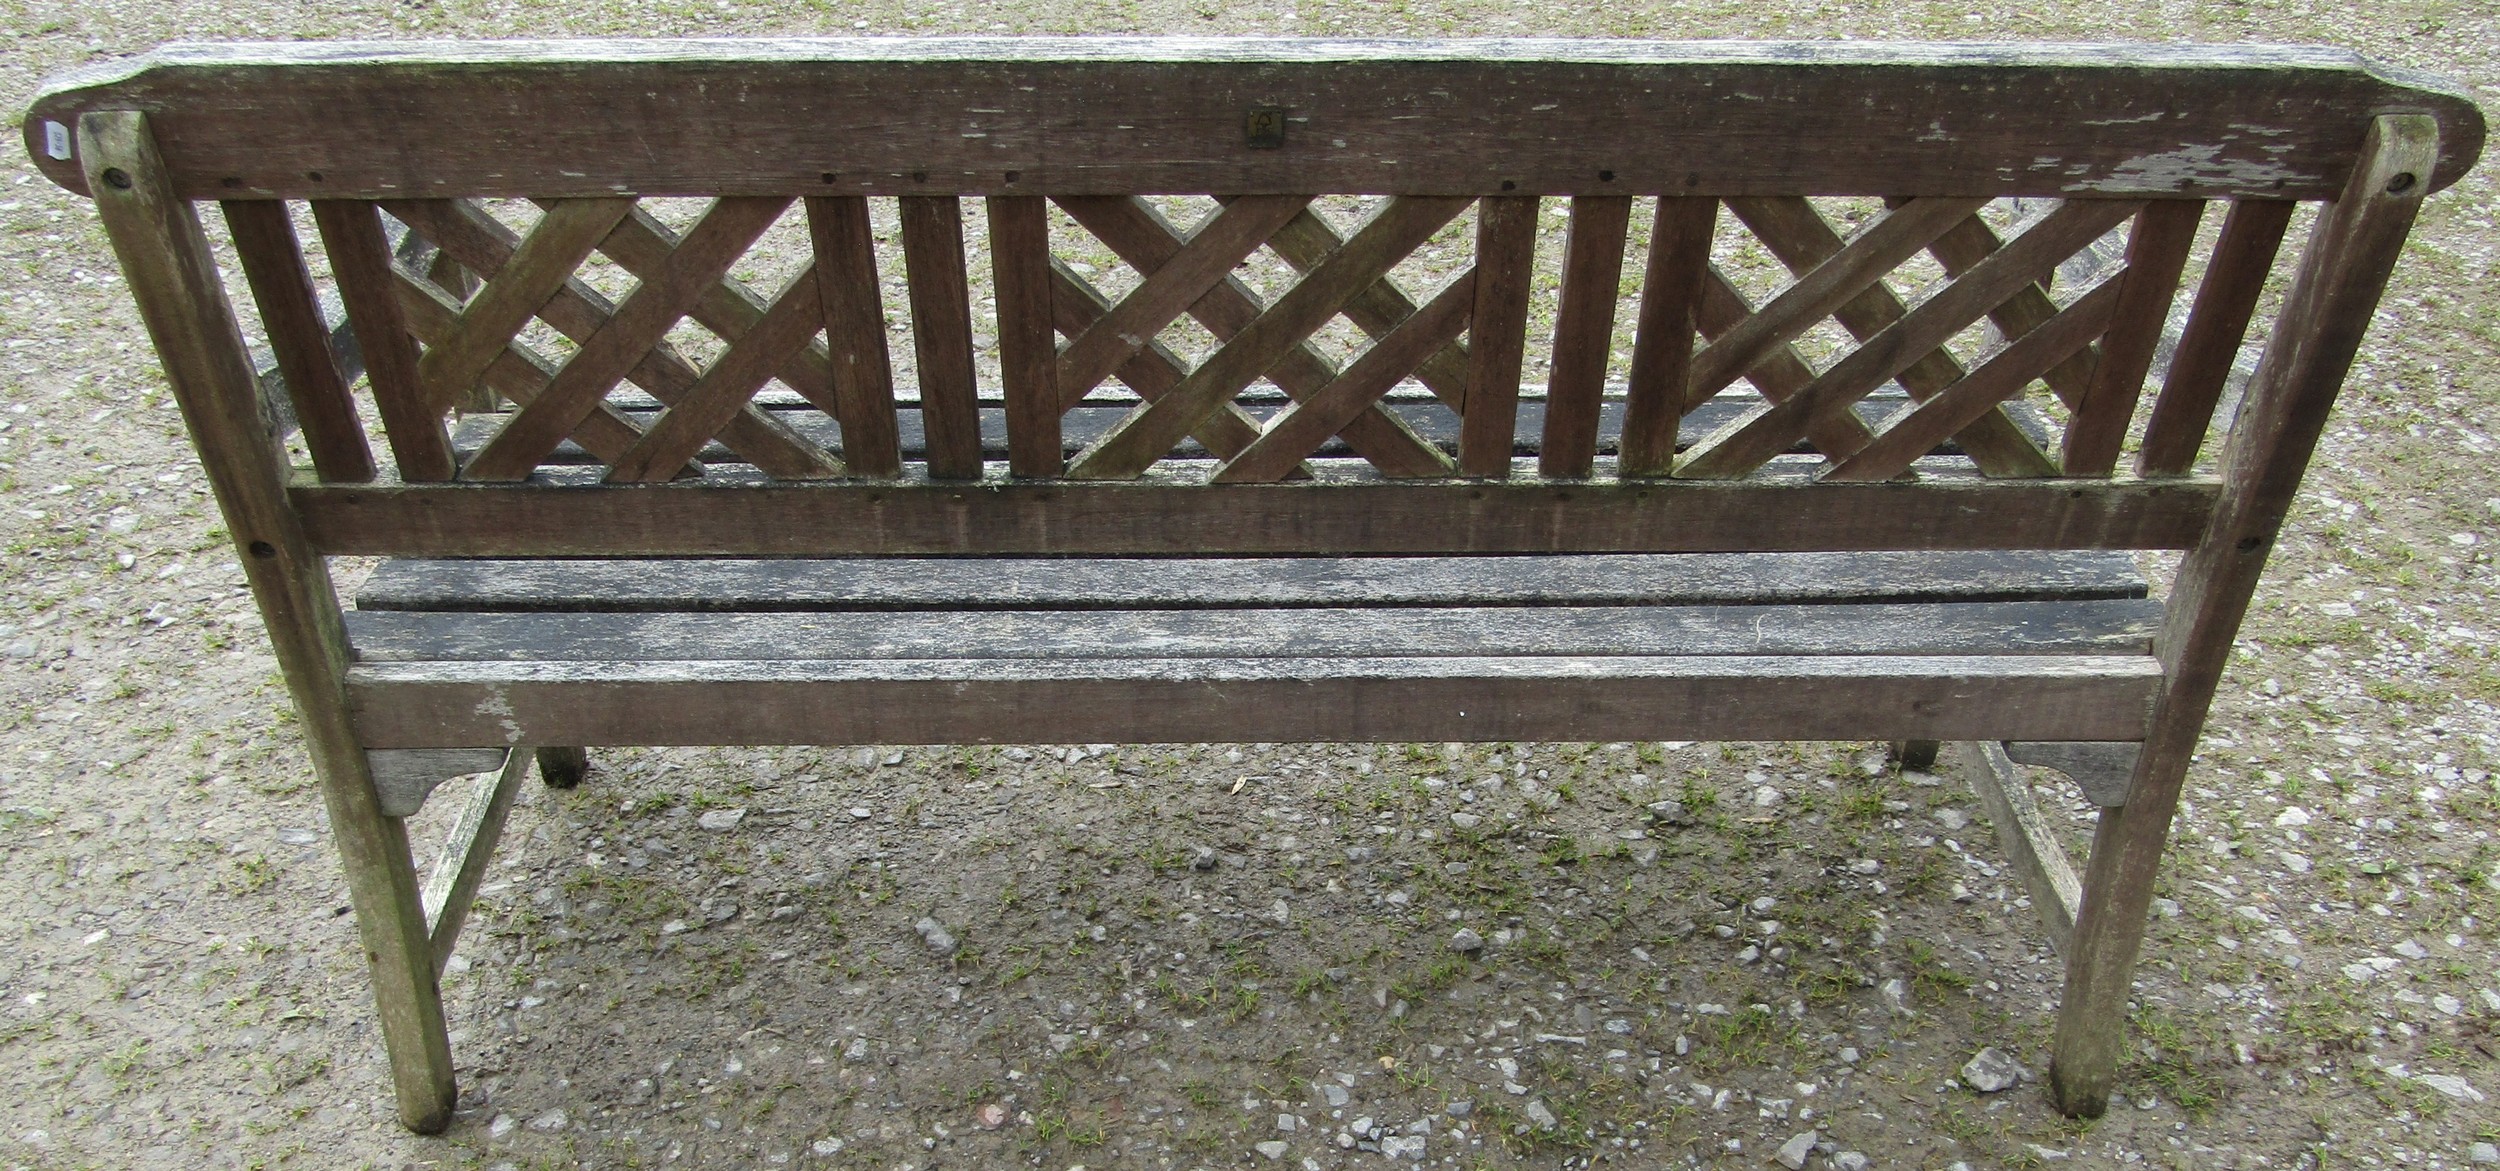 A weathered three seat garden bench with slatted seat and lattice panelled back beneath a shaped - Image 3 of 5